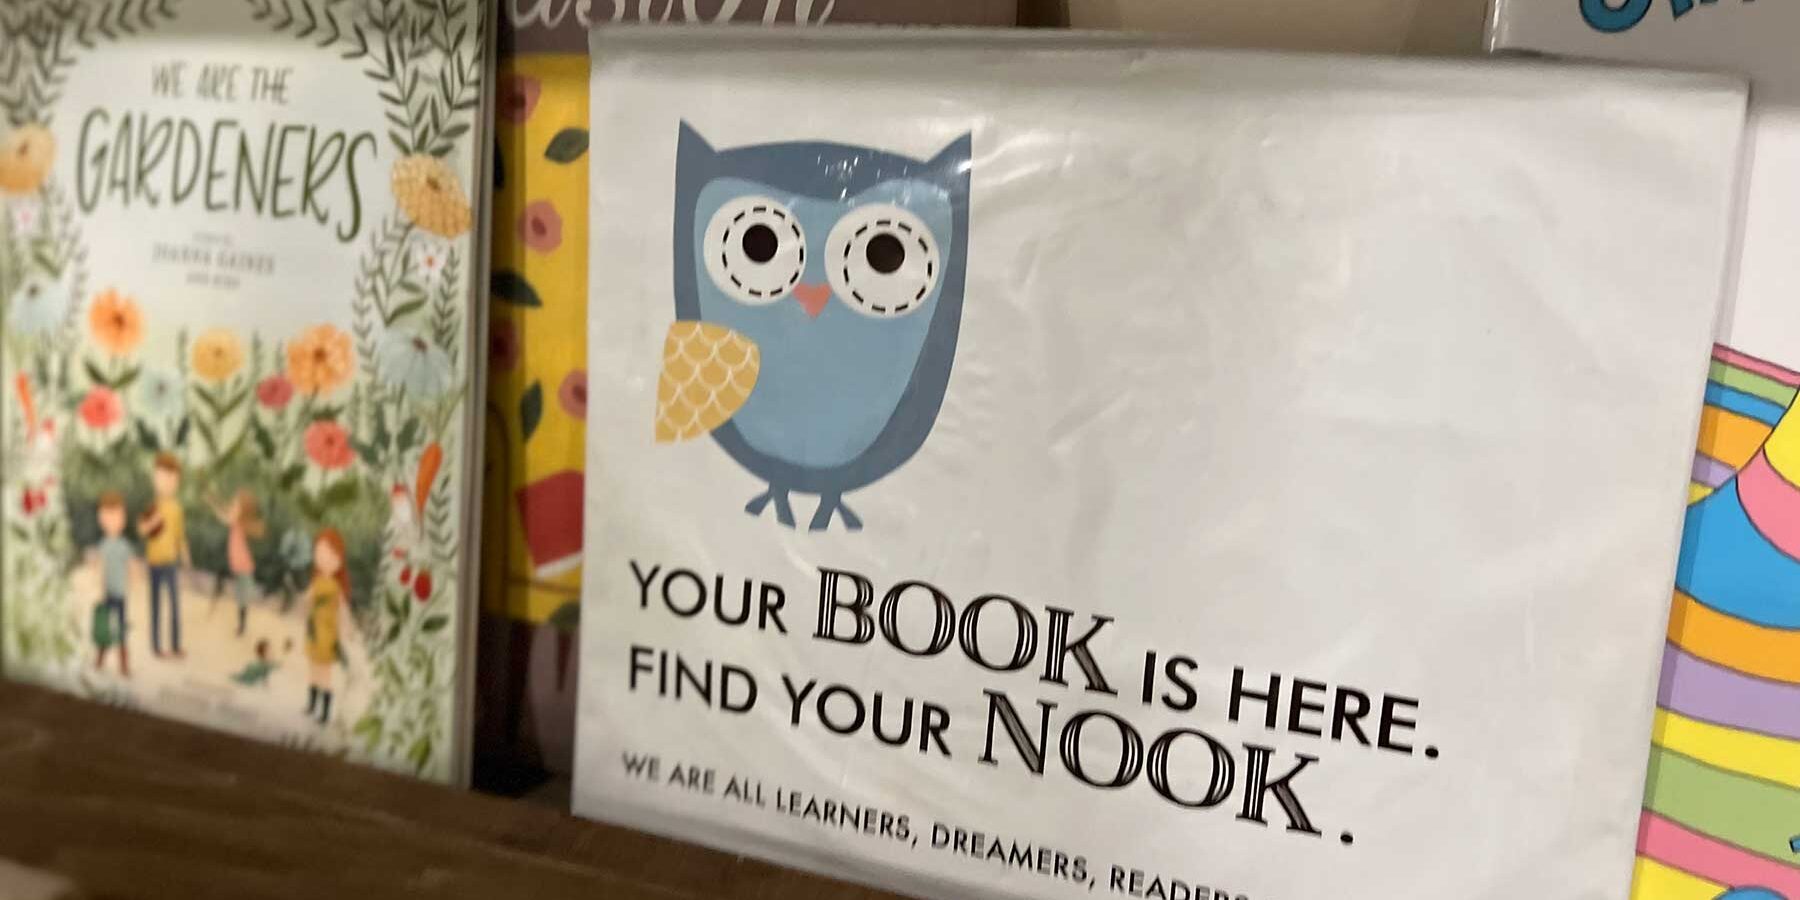 Books on a shelf with a sign "Your Book is here, find your Nook"